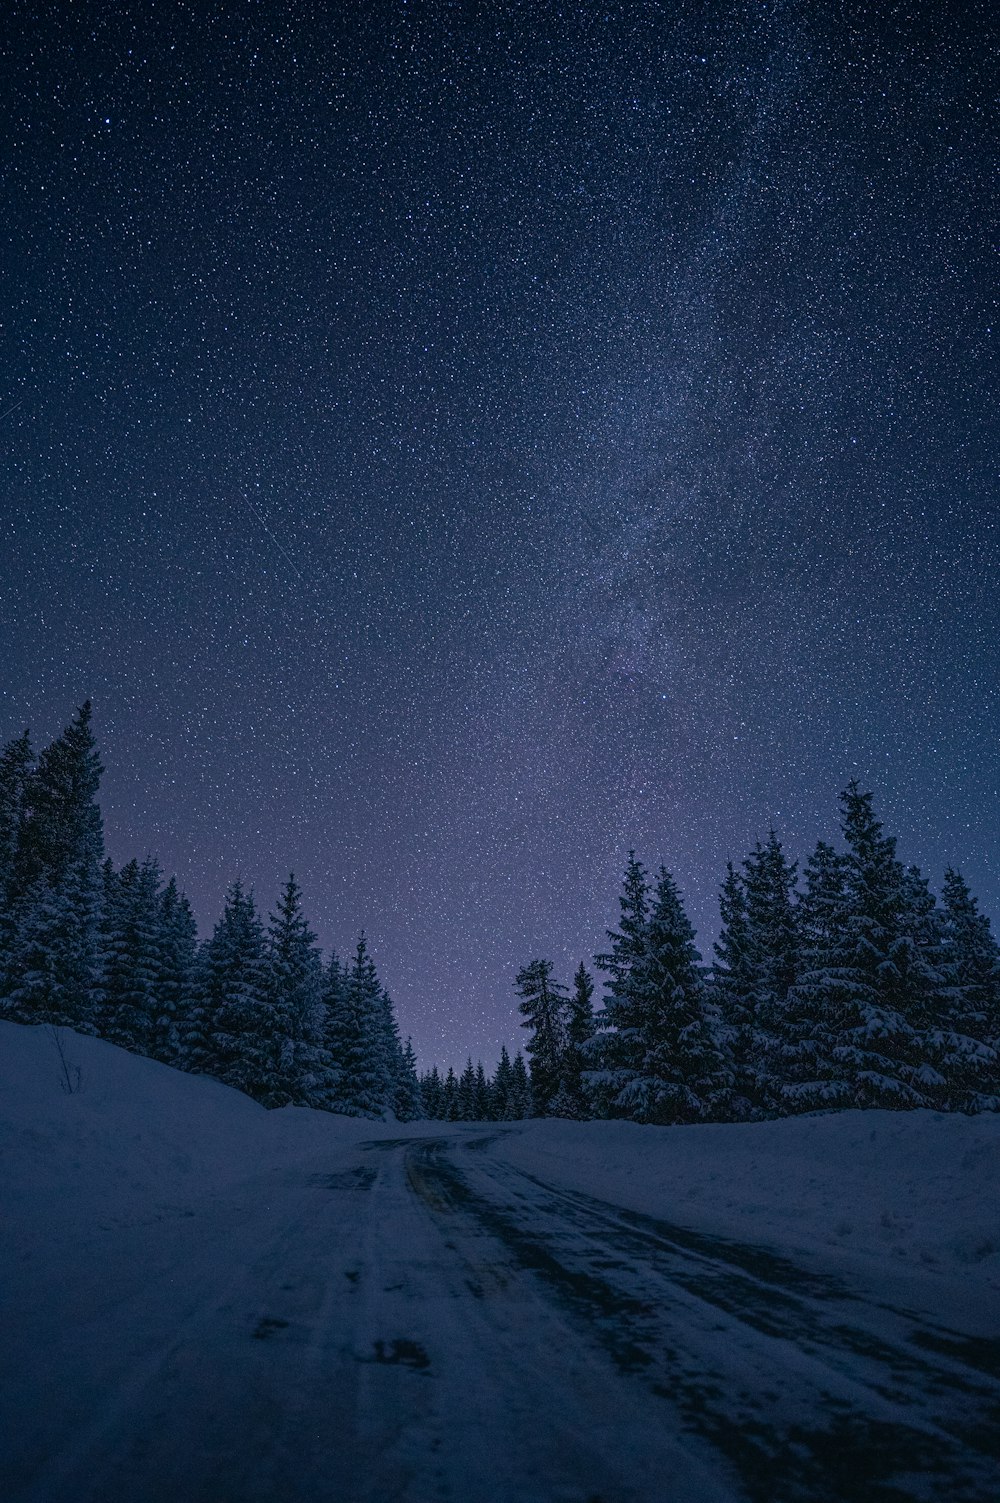 a snowy road with trees and a sky full of stars